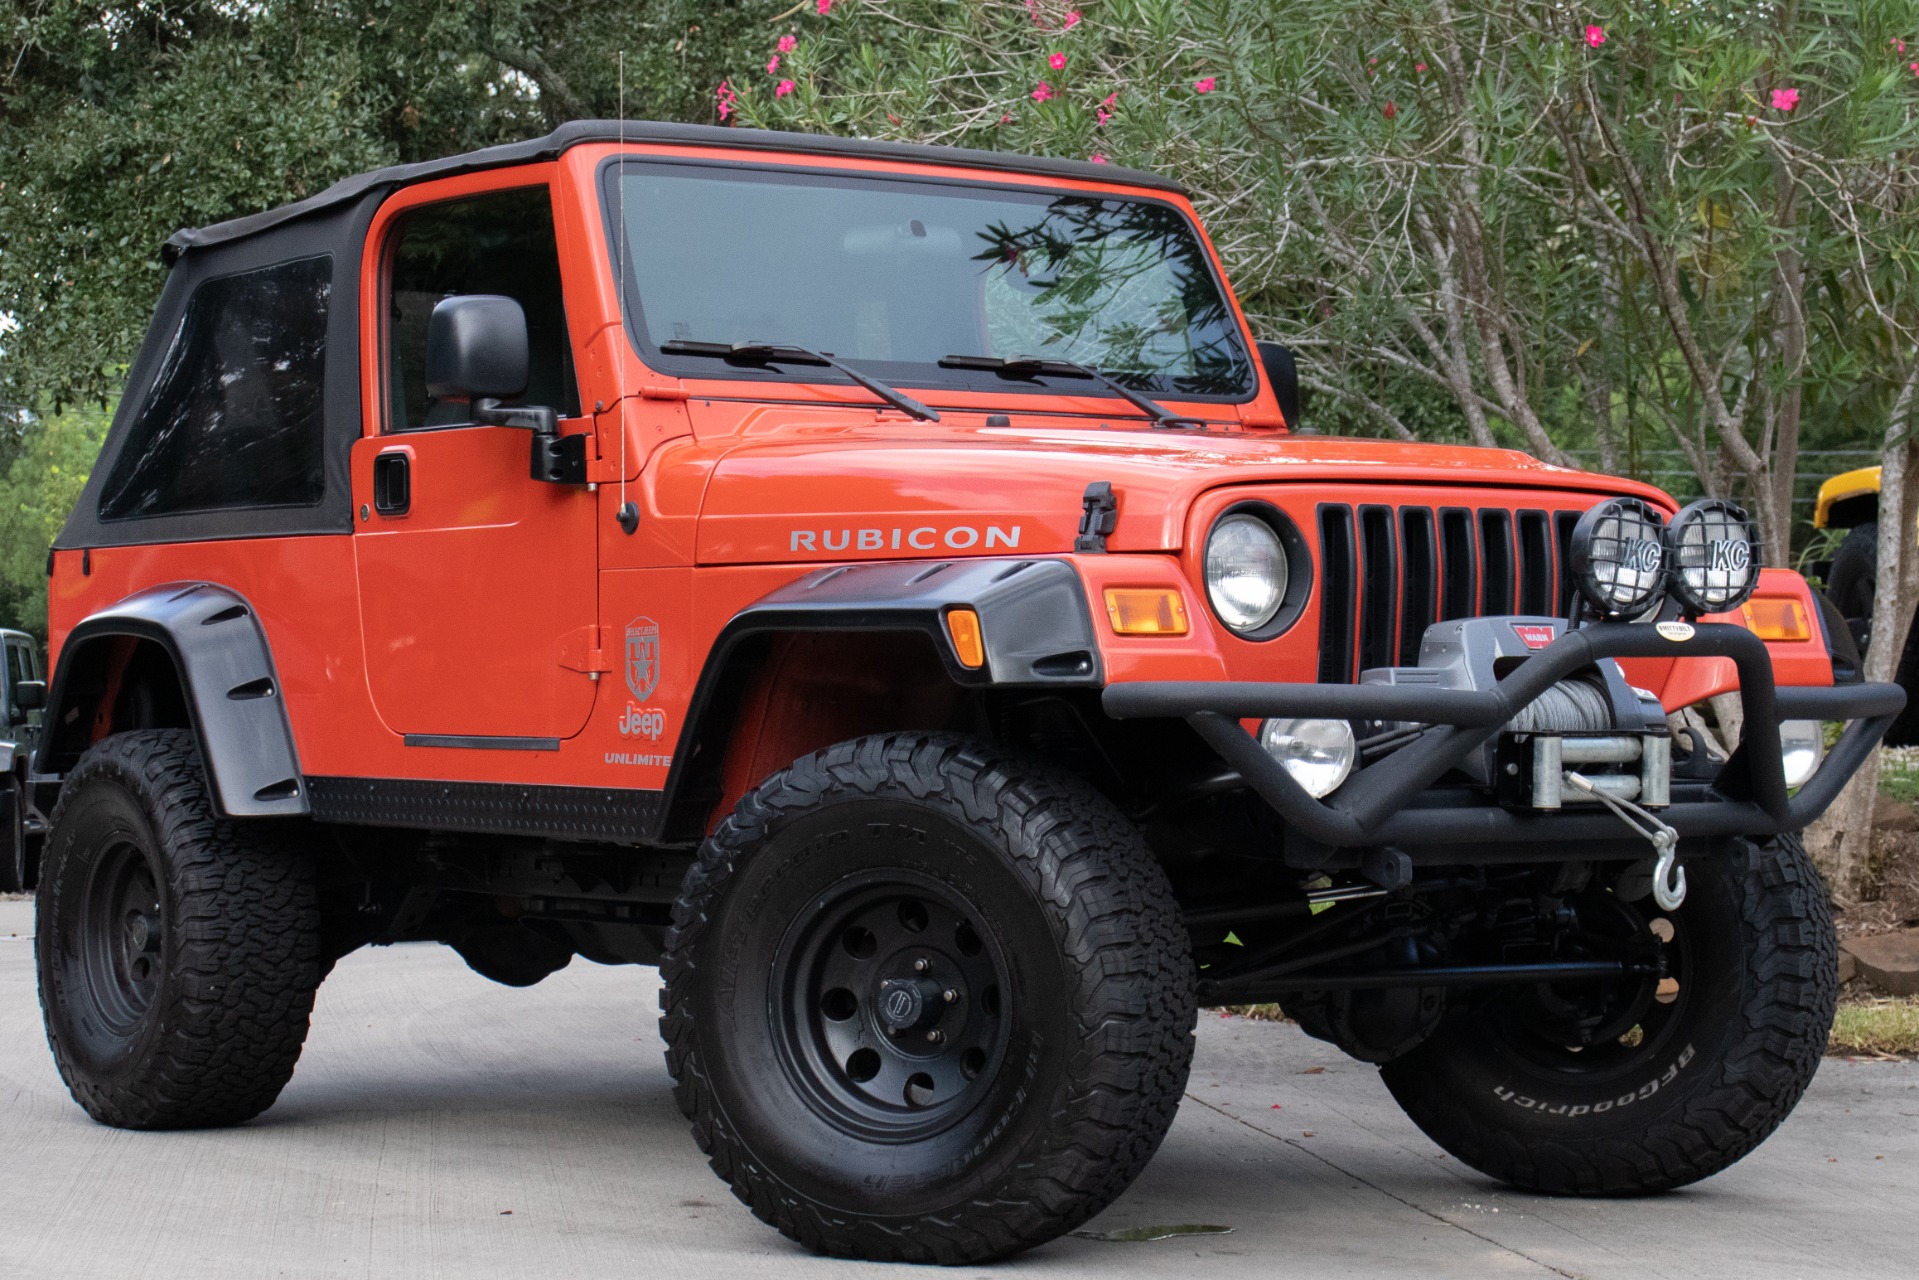 Used 2006 Jeep Wrangler Unlimited Rubicon For Sale ($29,995) | Select Jeeps  Inc. Stock #763822